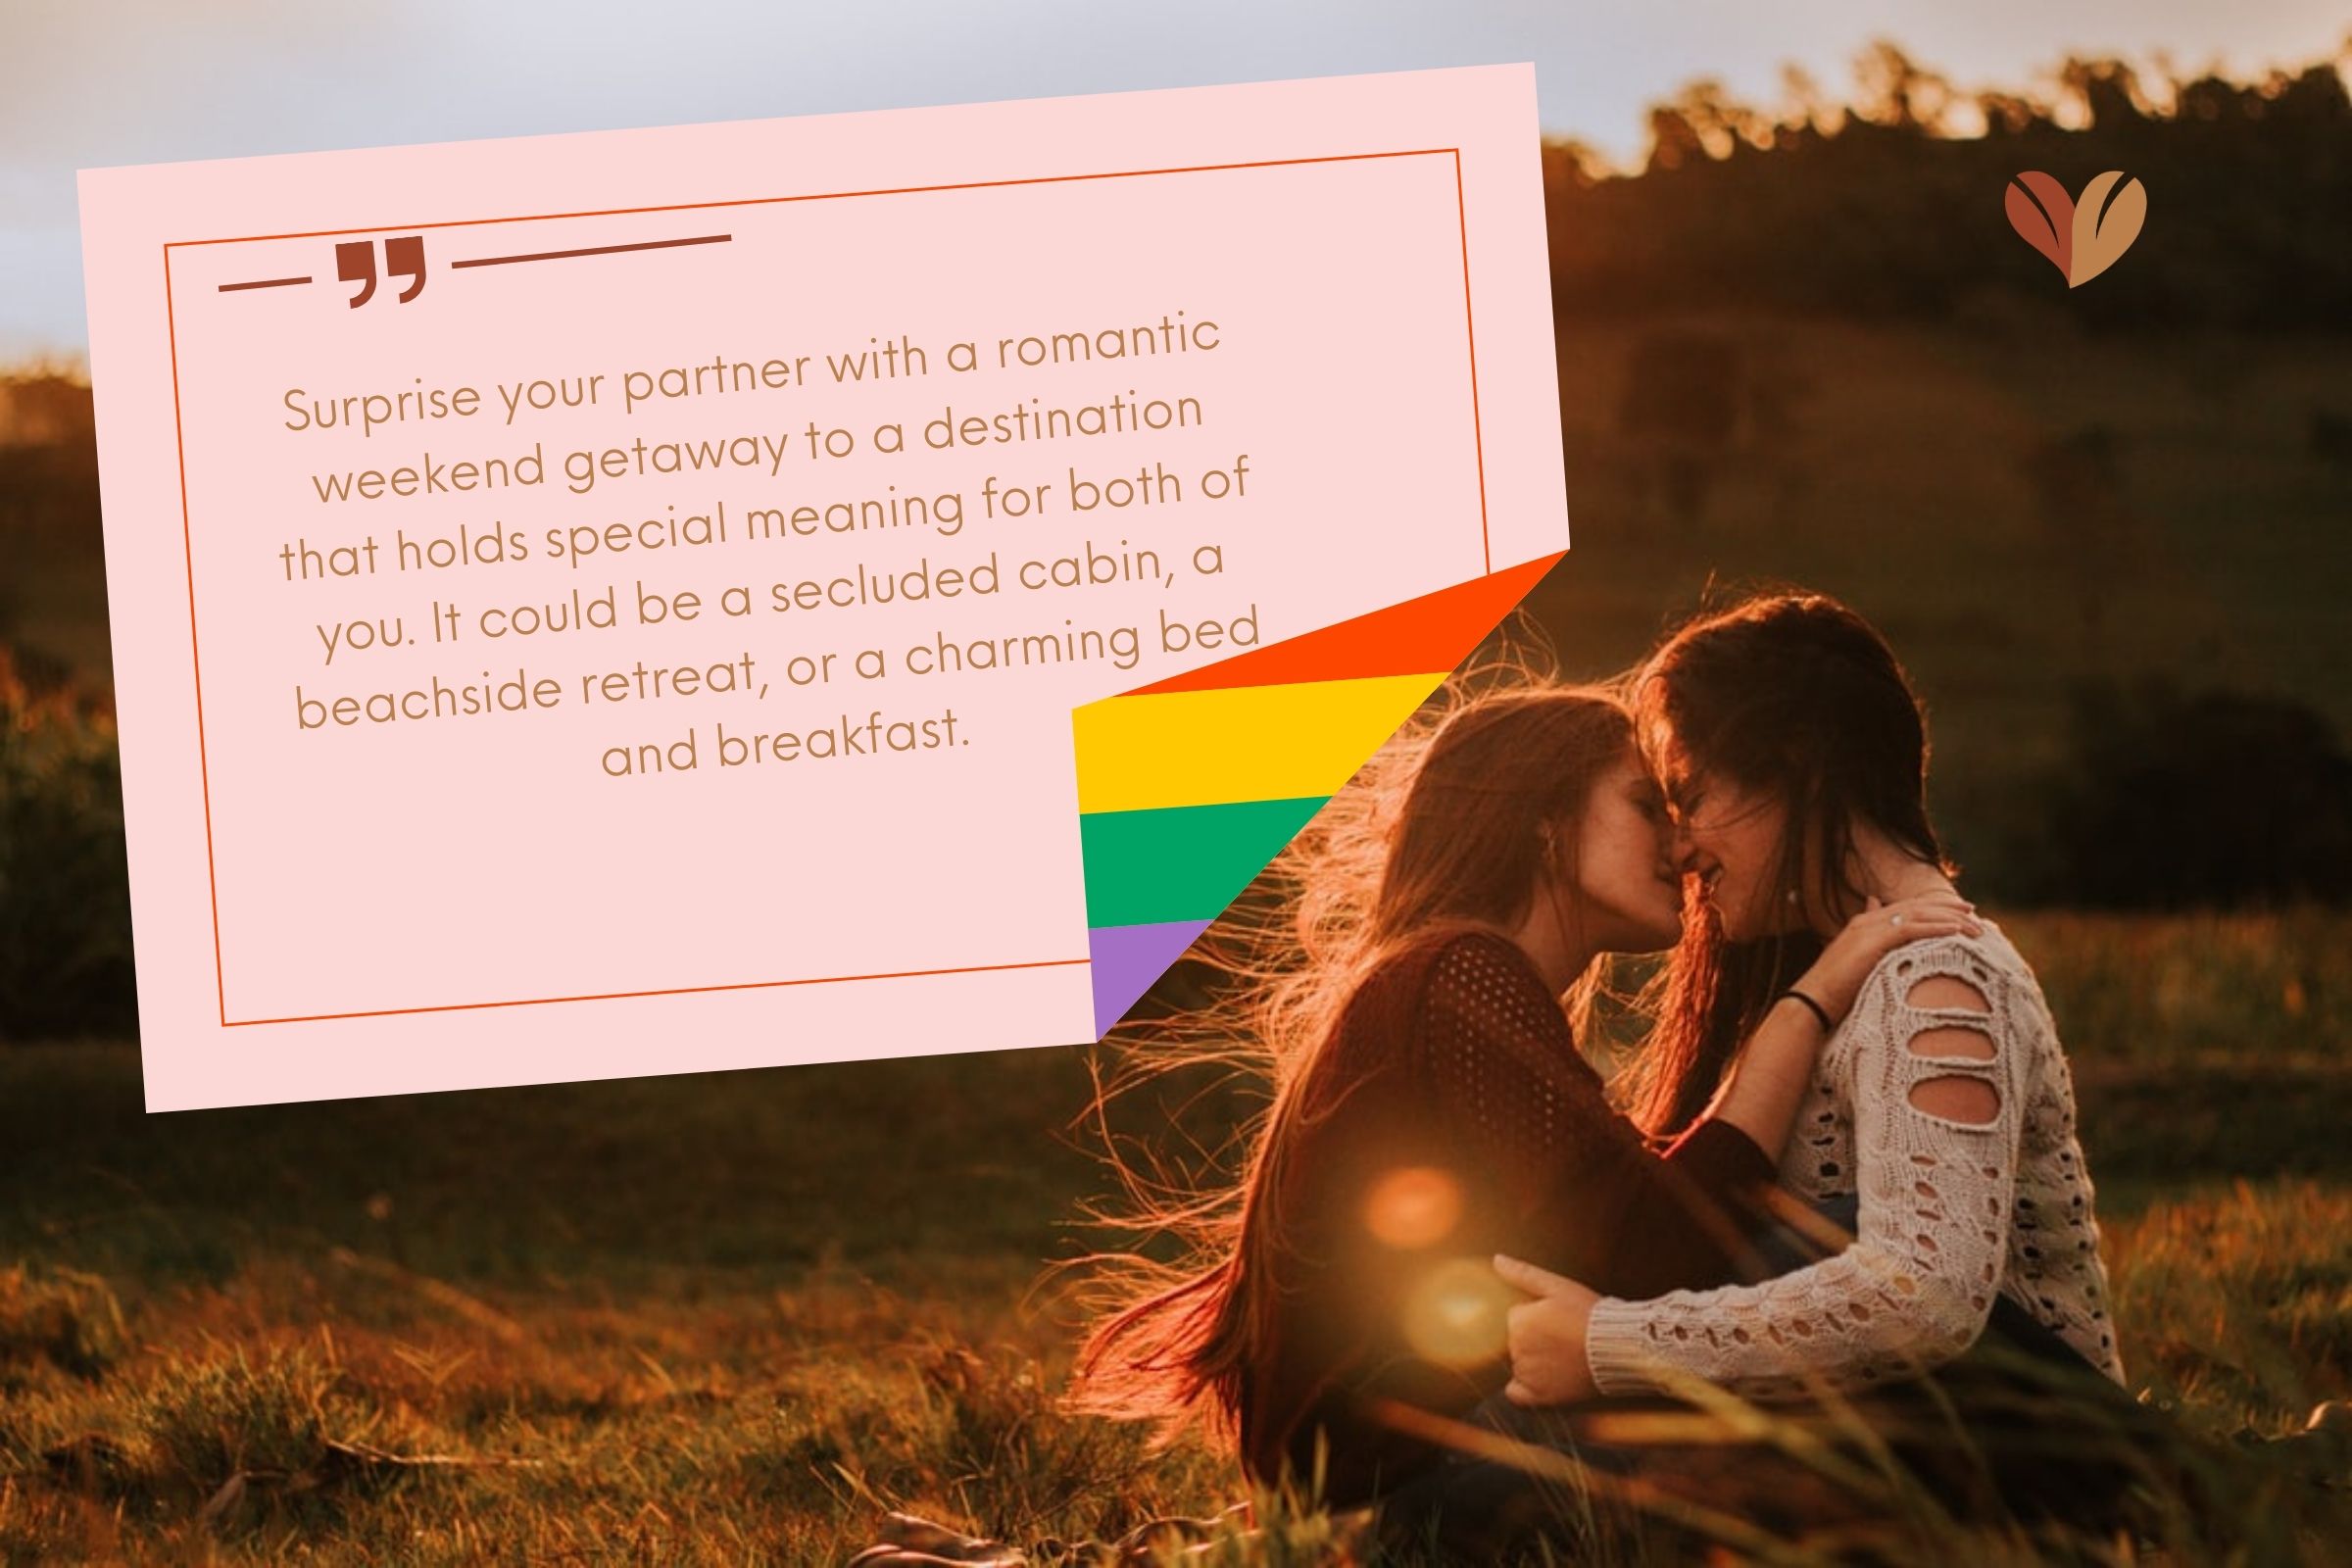 Romantic Weekend Getaway is the best choice for lesbian anniversary gifts 